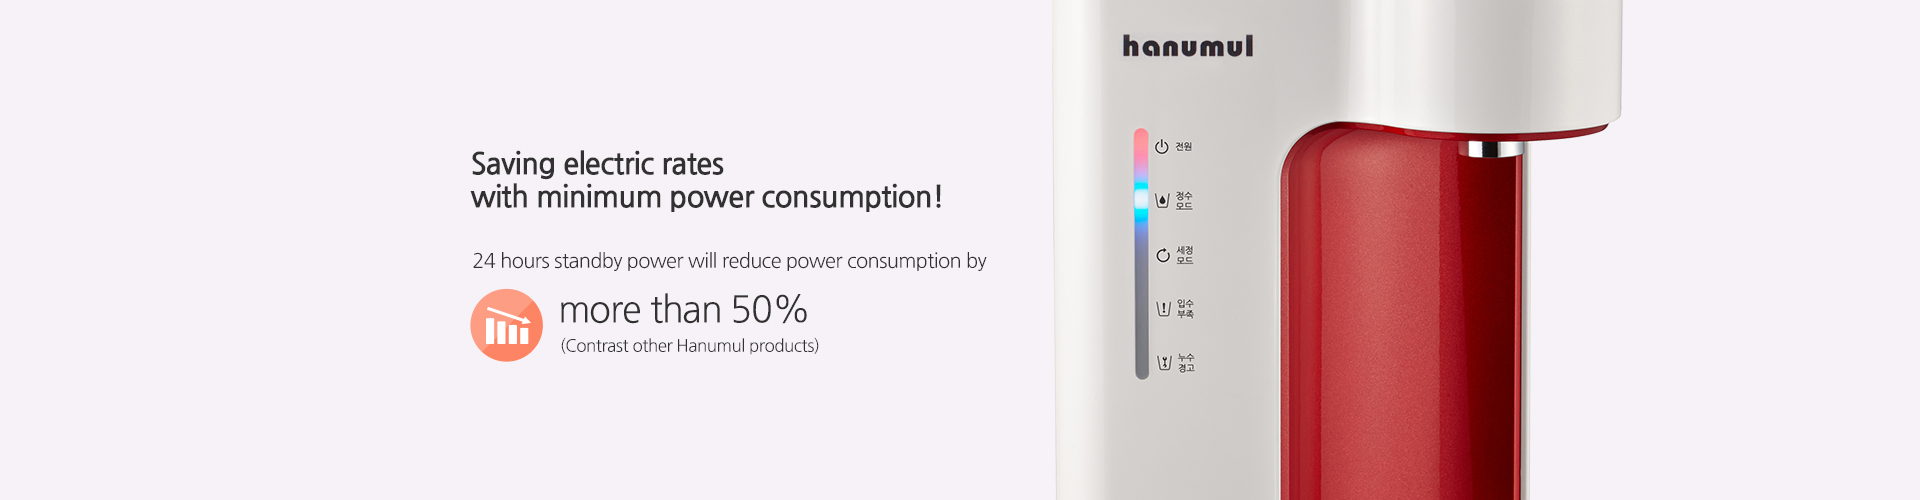 Saving electric rates with minimum power consumption!24 hours standby power will reduce power consumption by more than 50%(Contrast other Hanumul products)